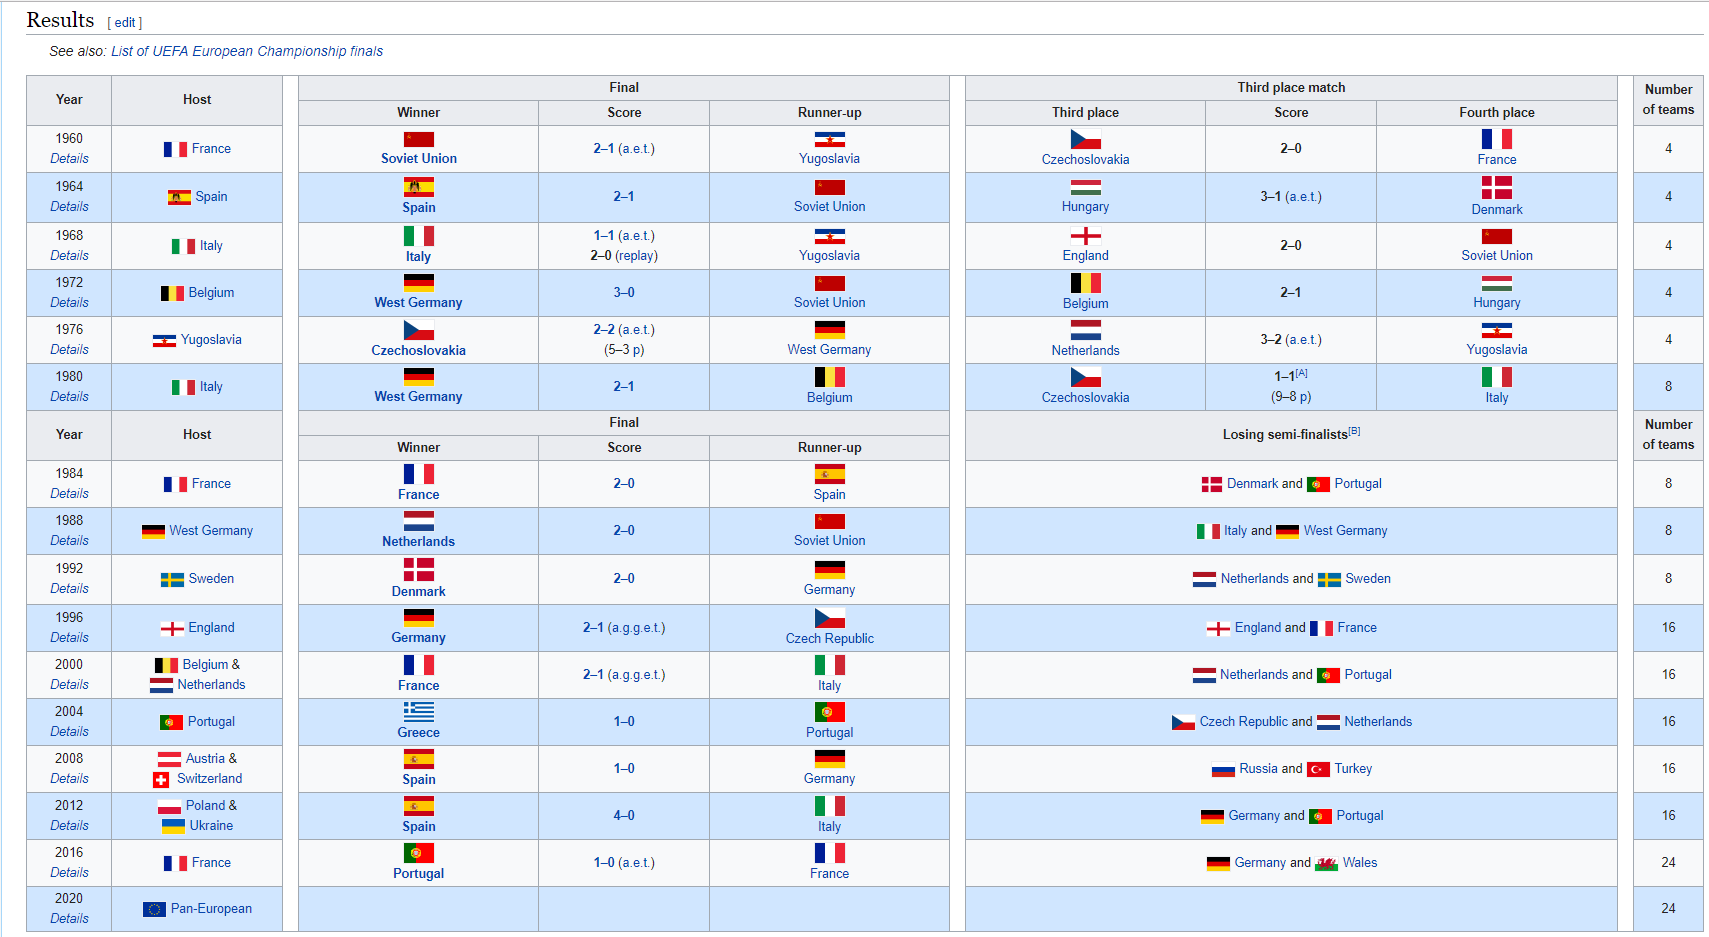 Screenshot shows Wikipedia Results table for the Euro Cup, which includes winners and other information.